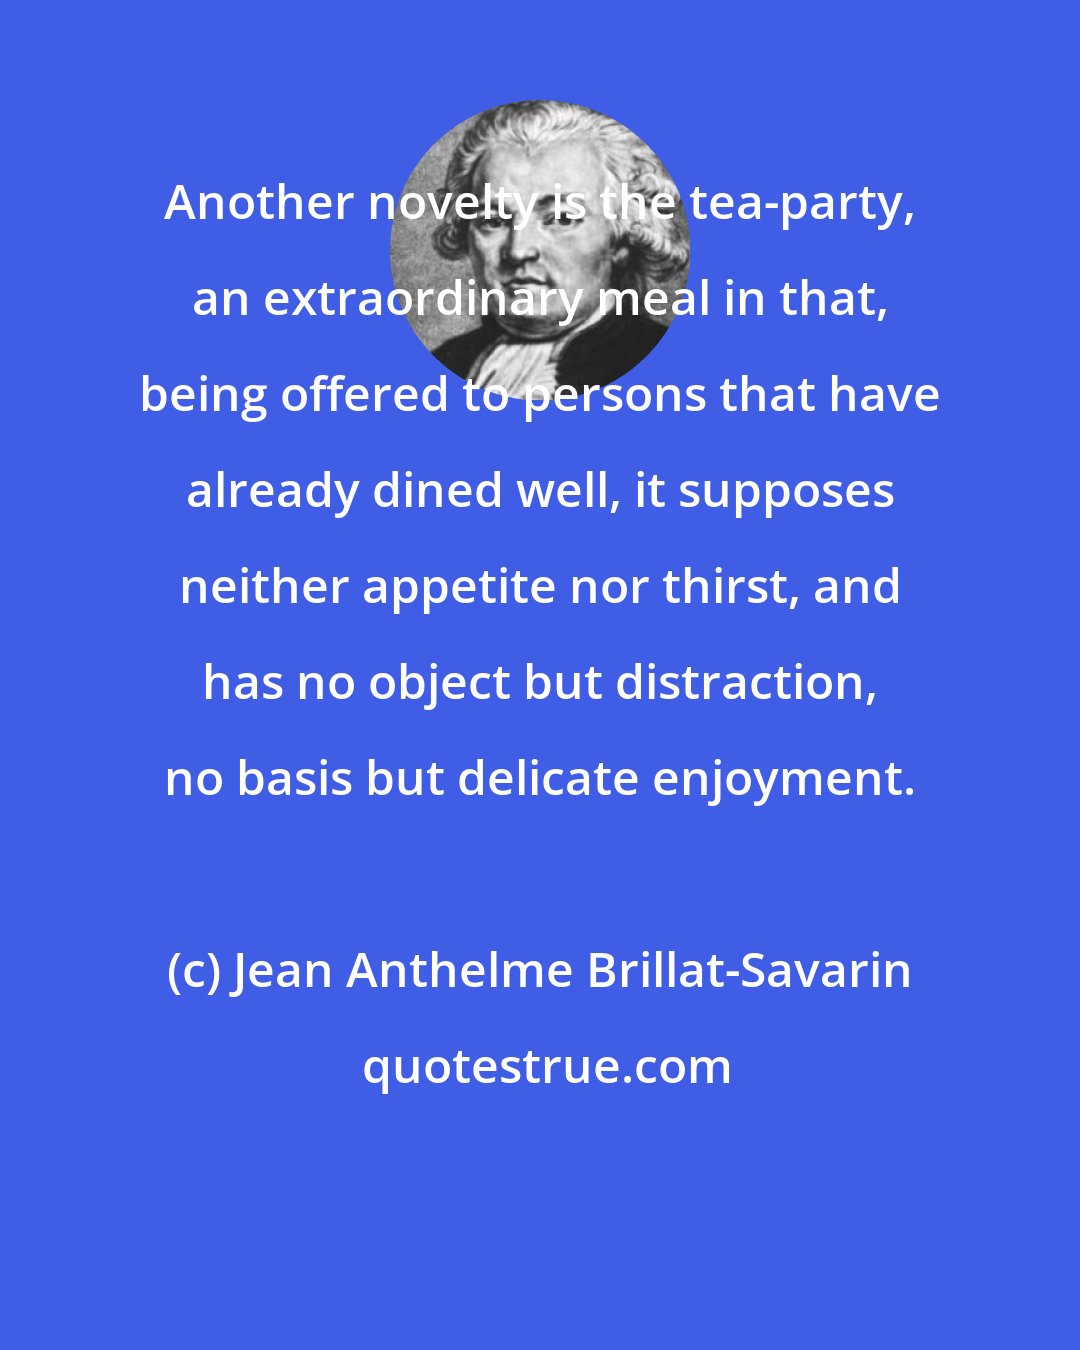 Jean Anthelme Brillat-Savarin: Another novelty is the tea-party, an extraordinary meal in that, being offered to persons that have already dined well, it supposes neither appetite nor thirst, and has no object but distraction, no basis but delicate enjoyment.